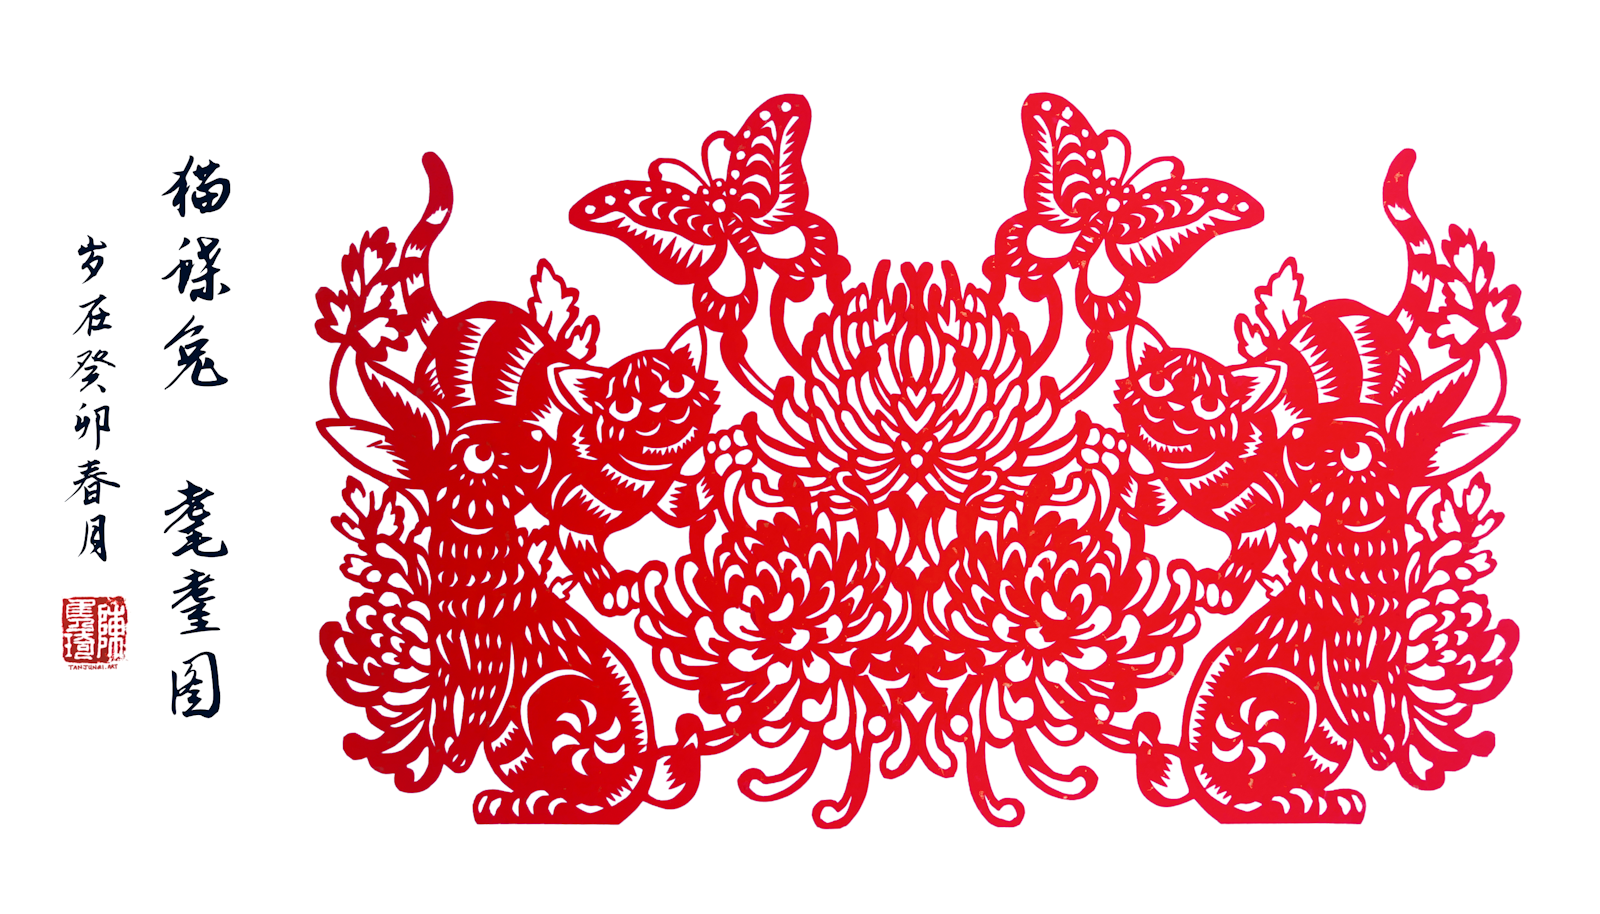 Symmetrical Chinese papercut showing two kittens and two rabbits standing amongst blooming flowers admiring a butterfly mid-flight. The kittens are looking at the butterfly playfully.